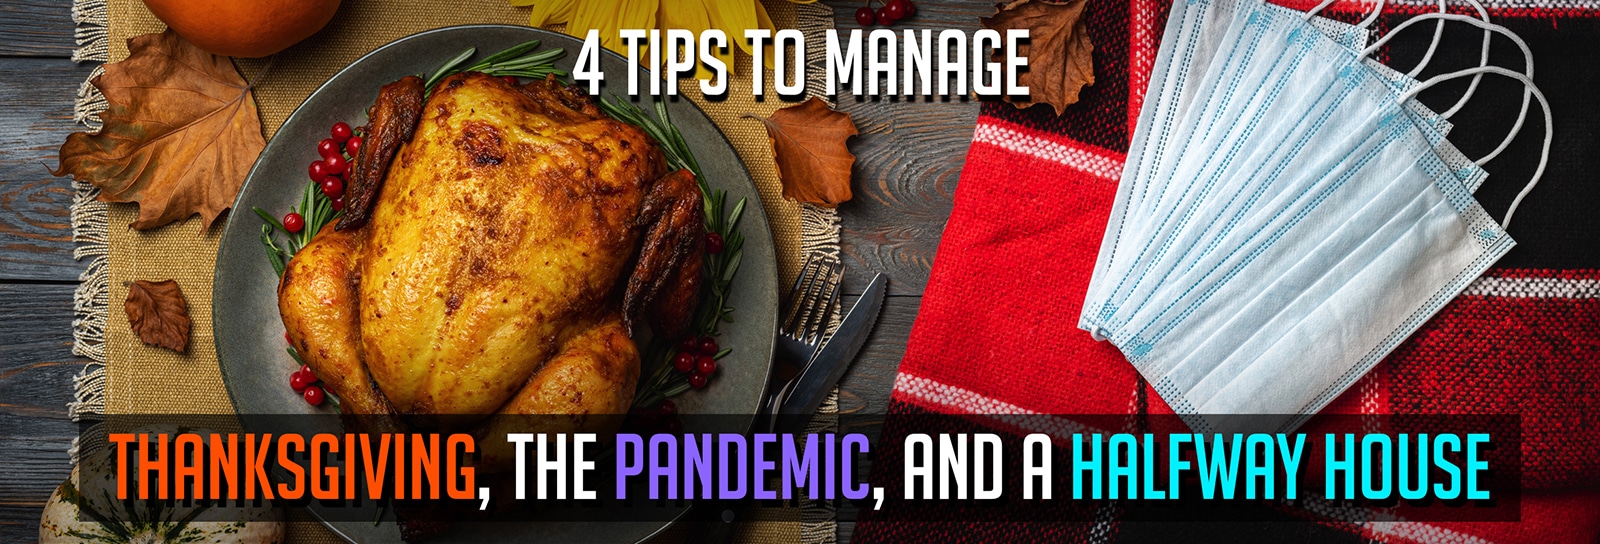 4 Tips To Manage Thanksgiving, The Pandemic, and a Halfway House